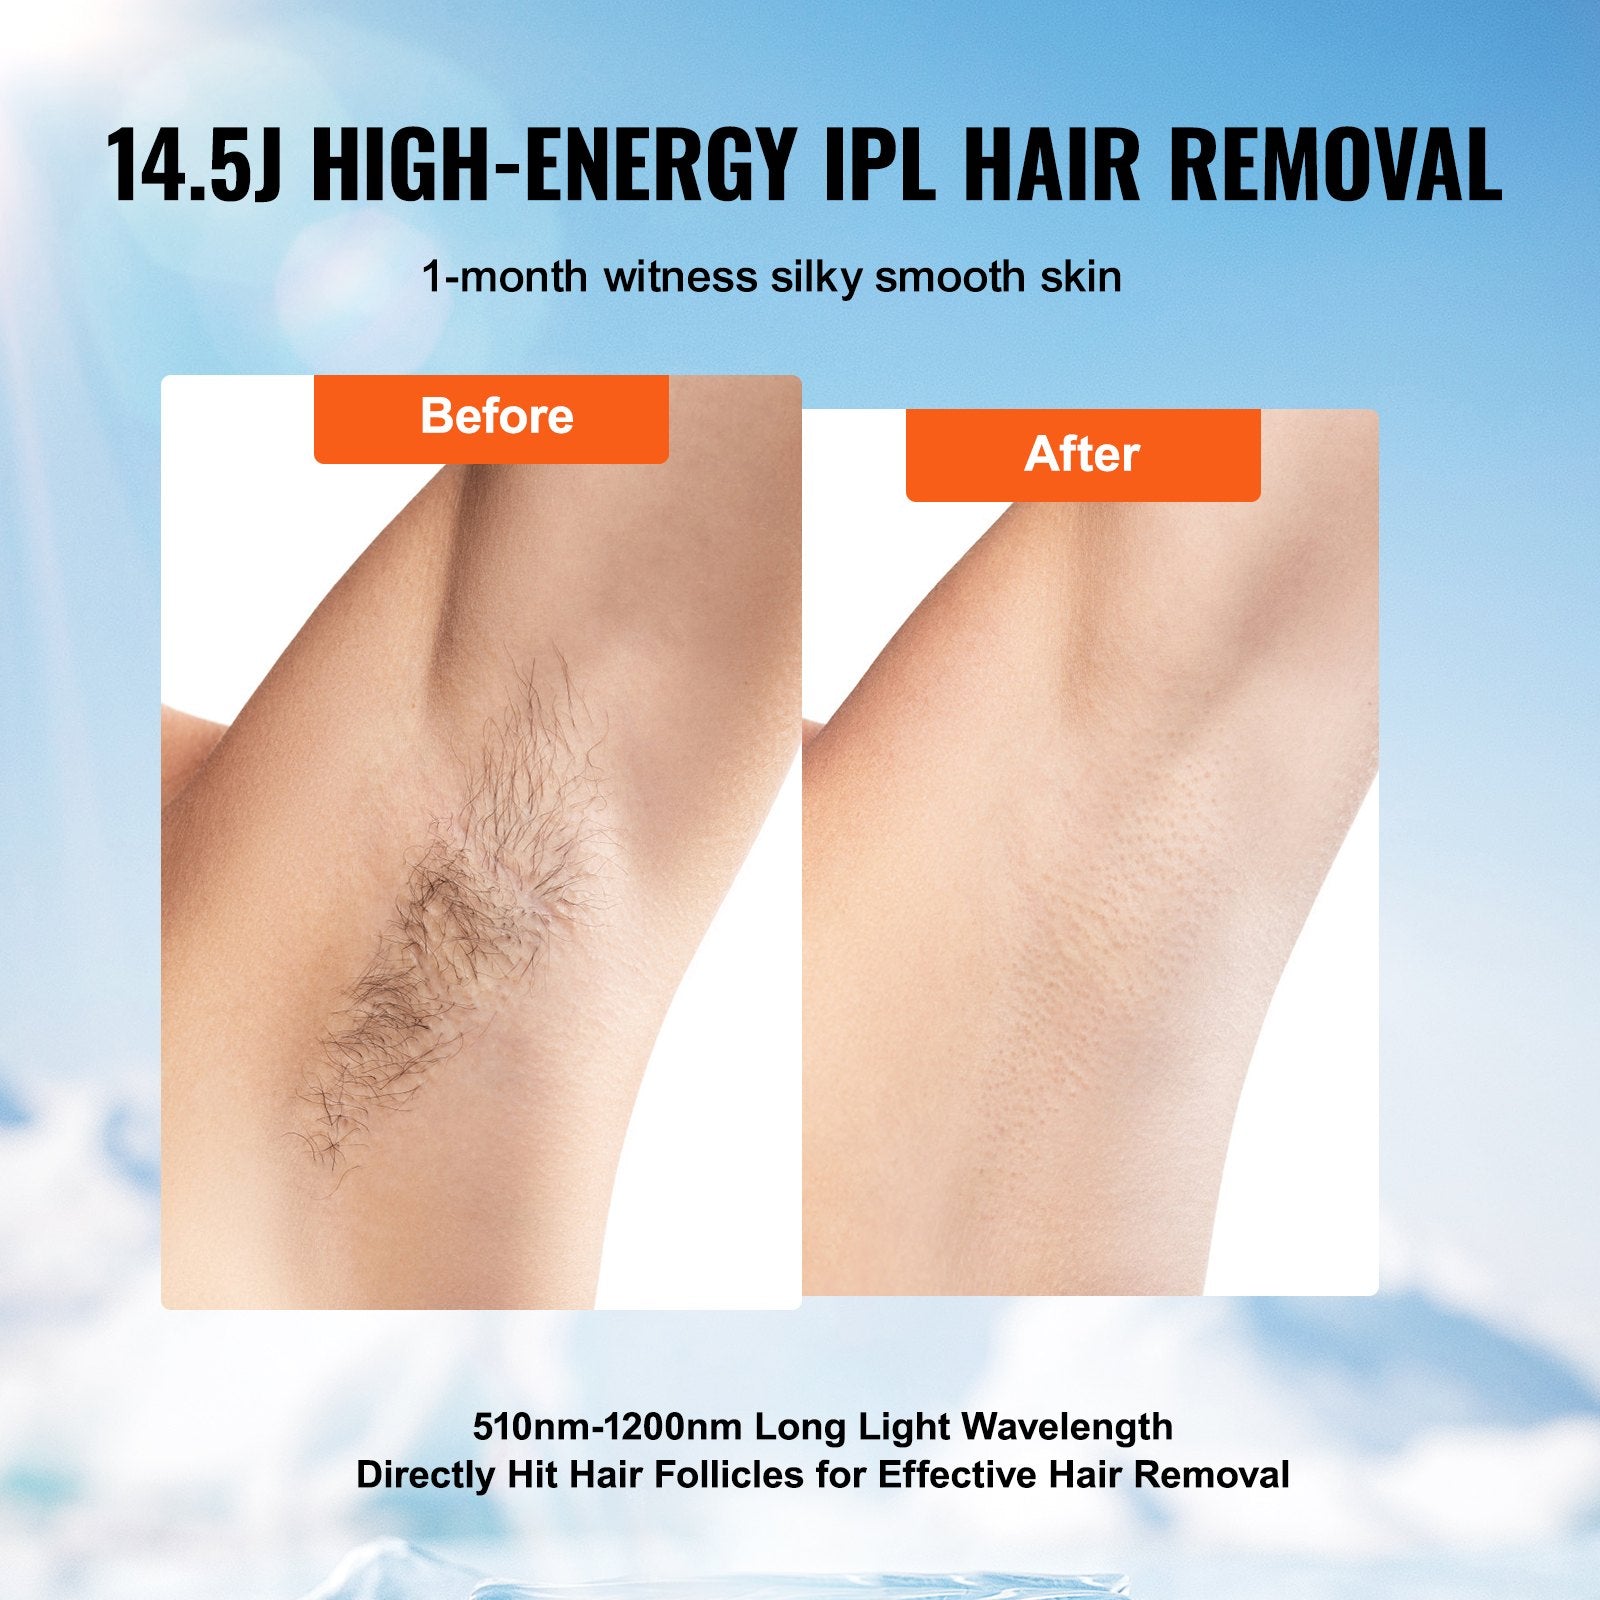 VEVOR IPL Hair Removal, Permanent Hair Removal with Sapphire Ice Cooling System, Painless At-Home Hair Removal Device for Women Men, Auto/Manual Modes, 5 Levels for Body & Face  | VEVOR US